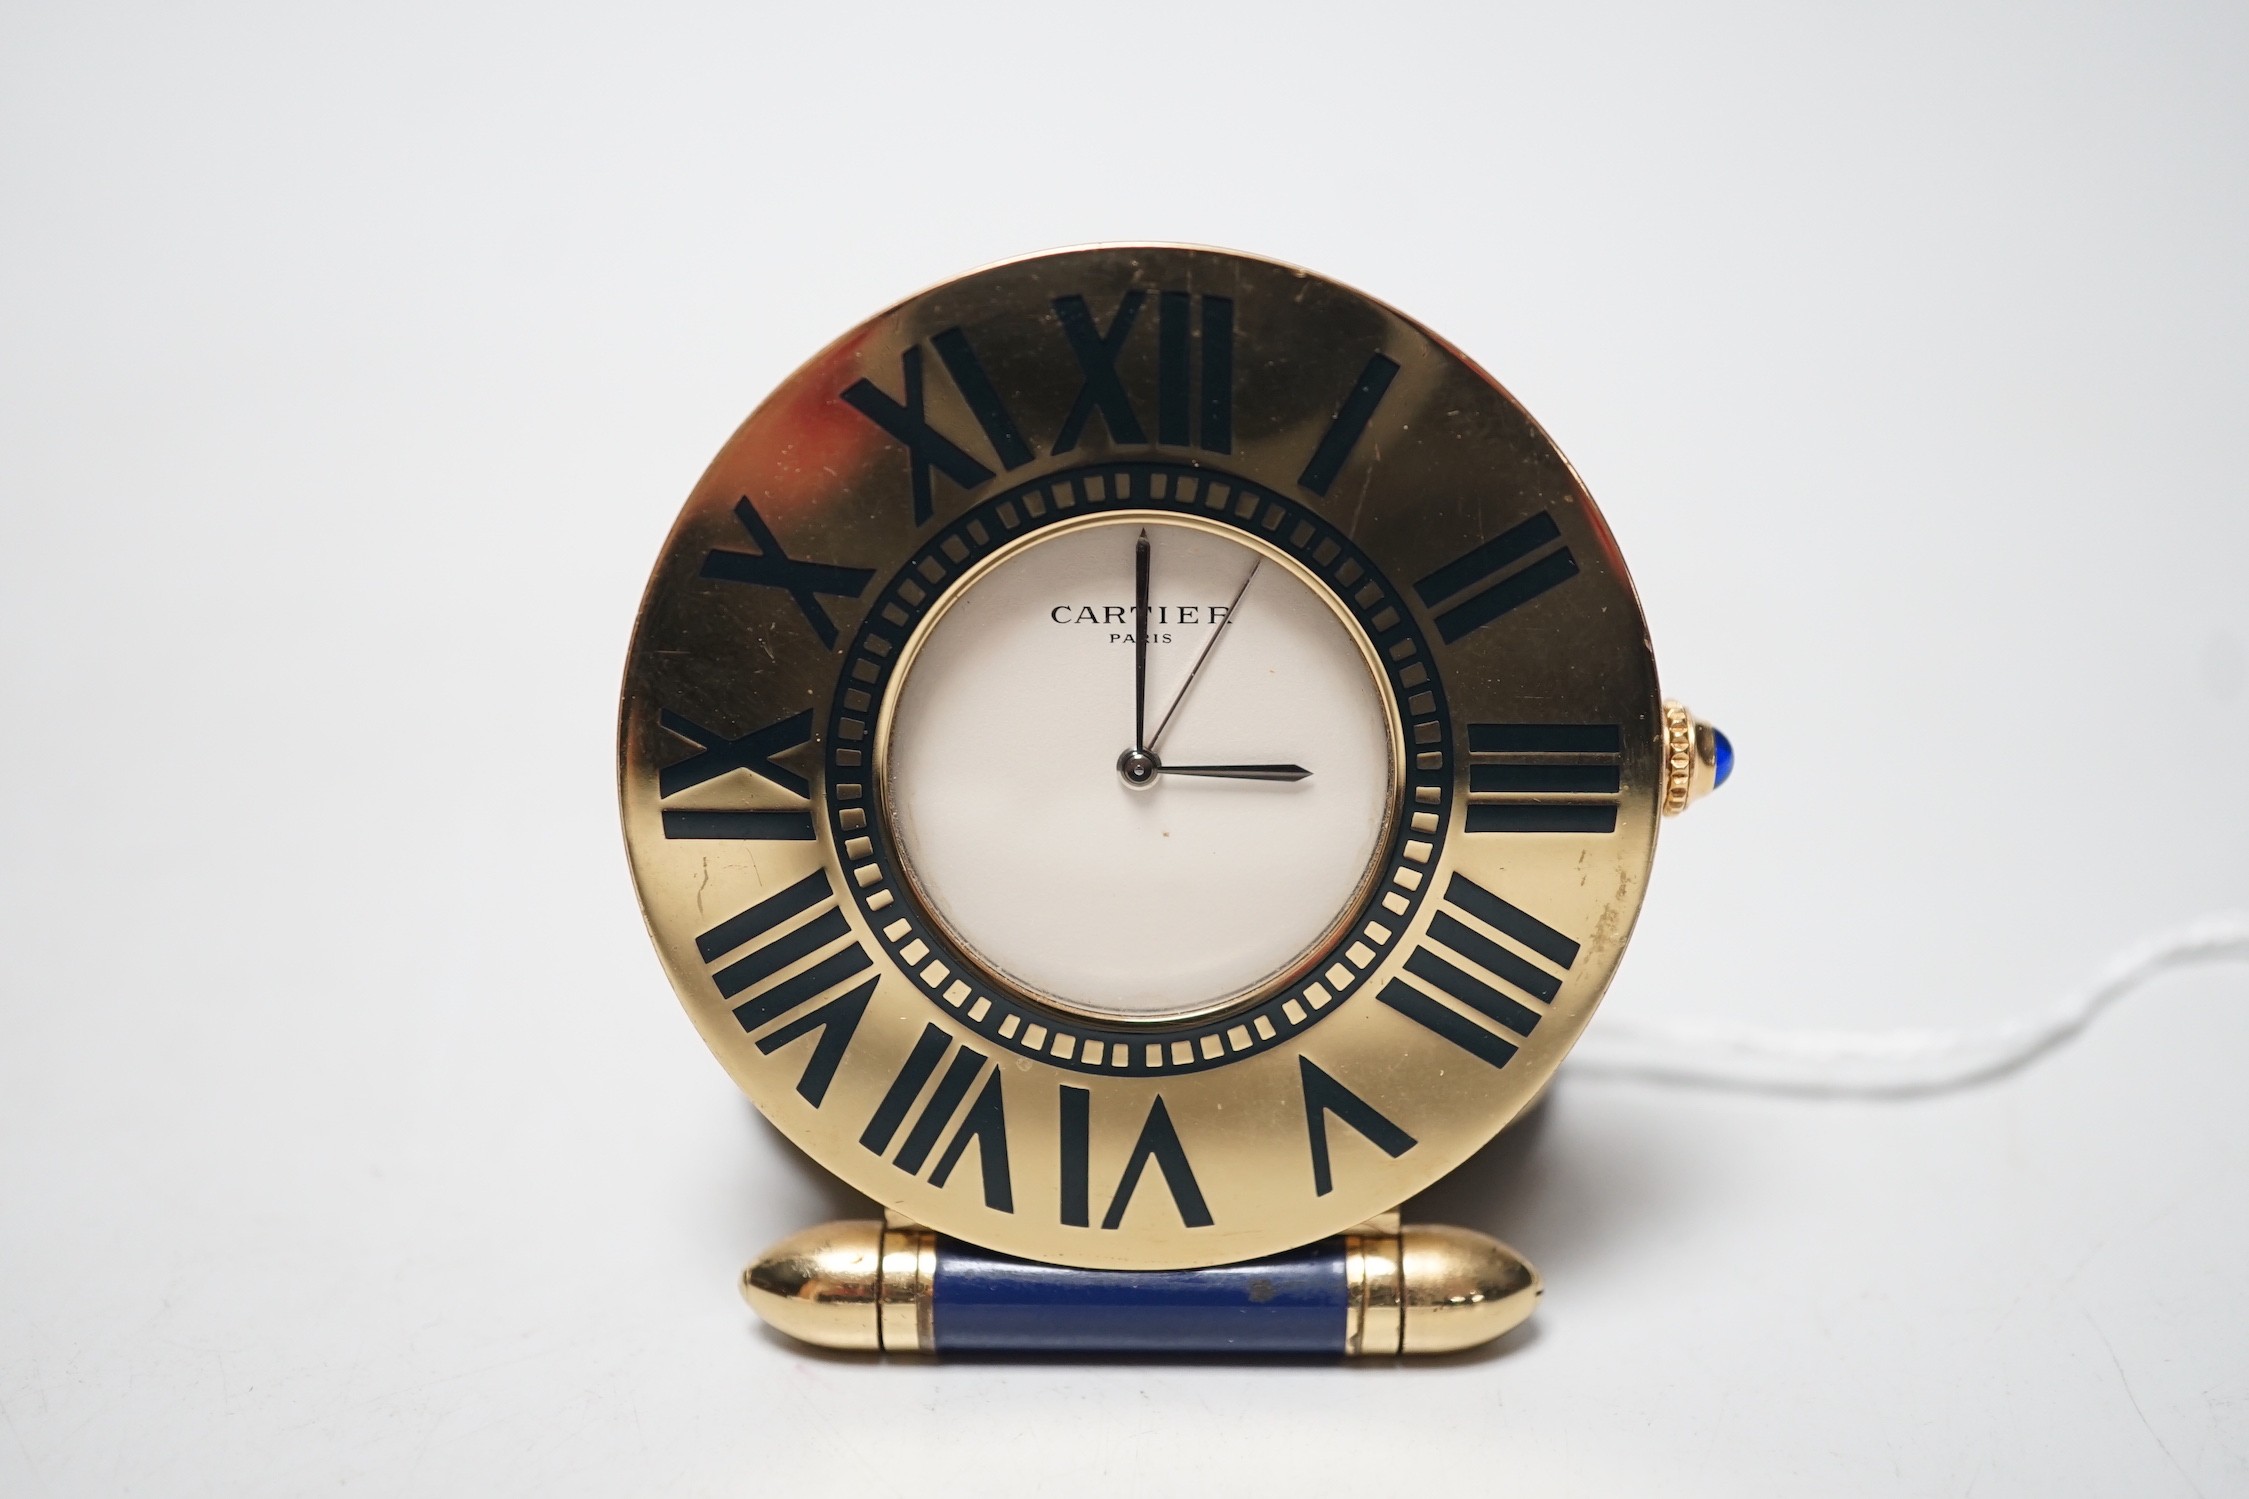 A Cartier travelling alarm timepiece, serial number 357105789